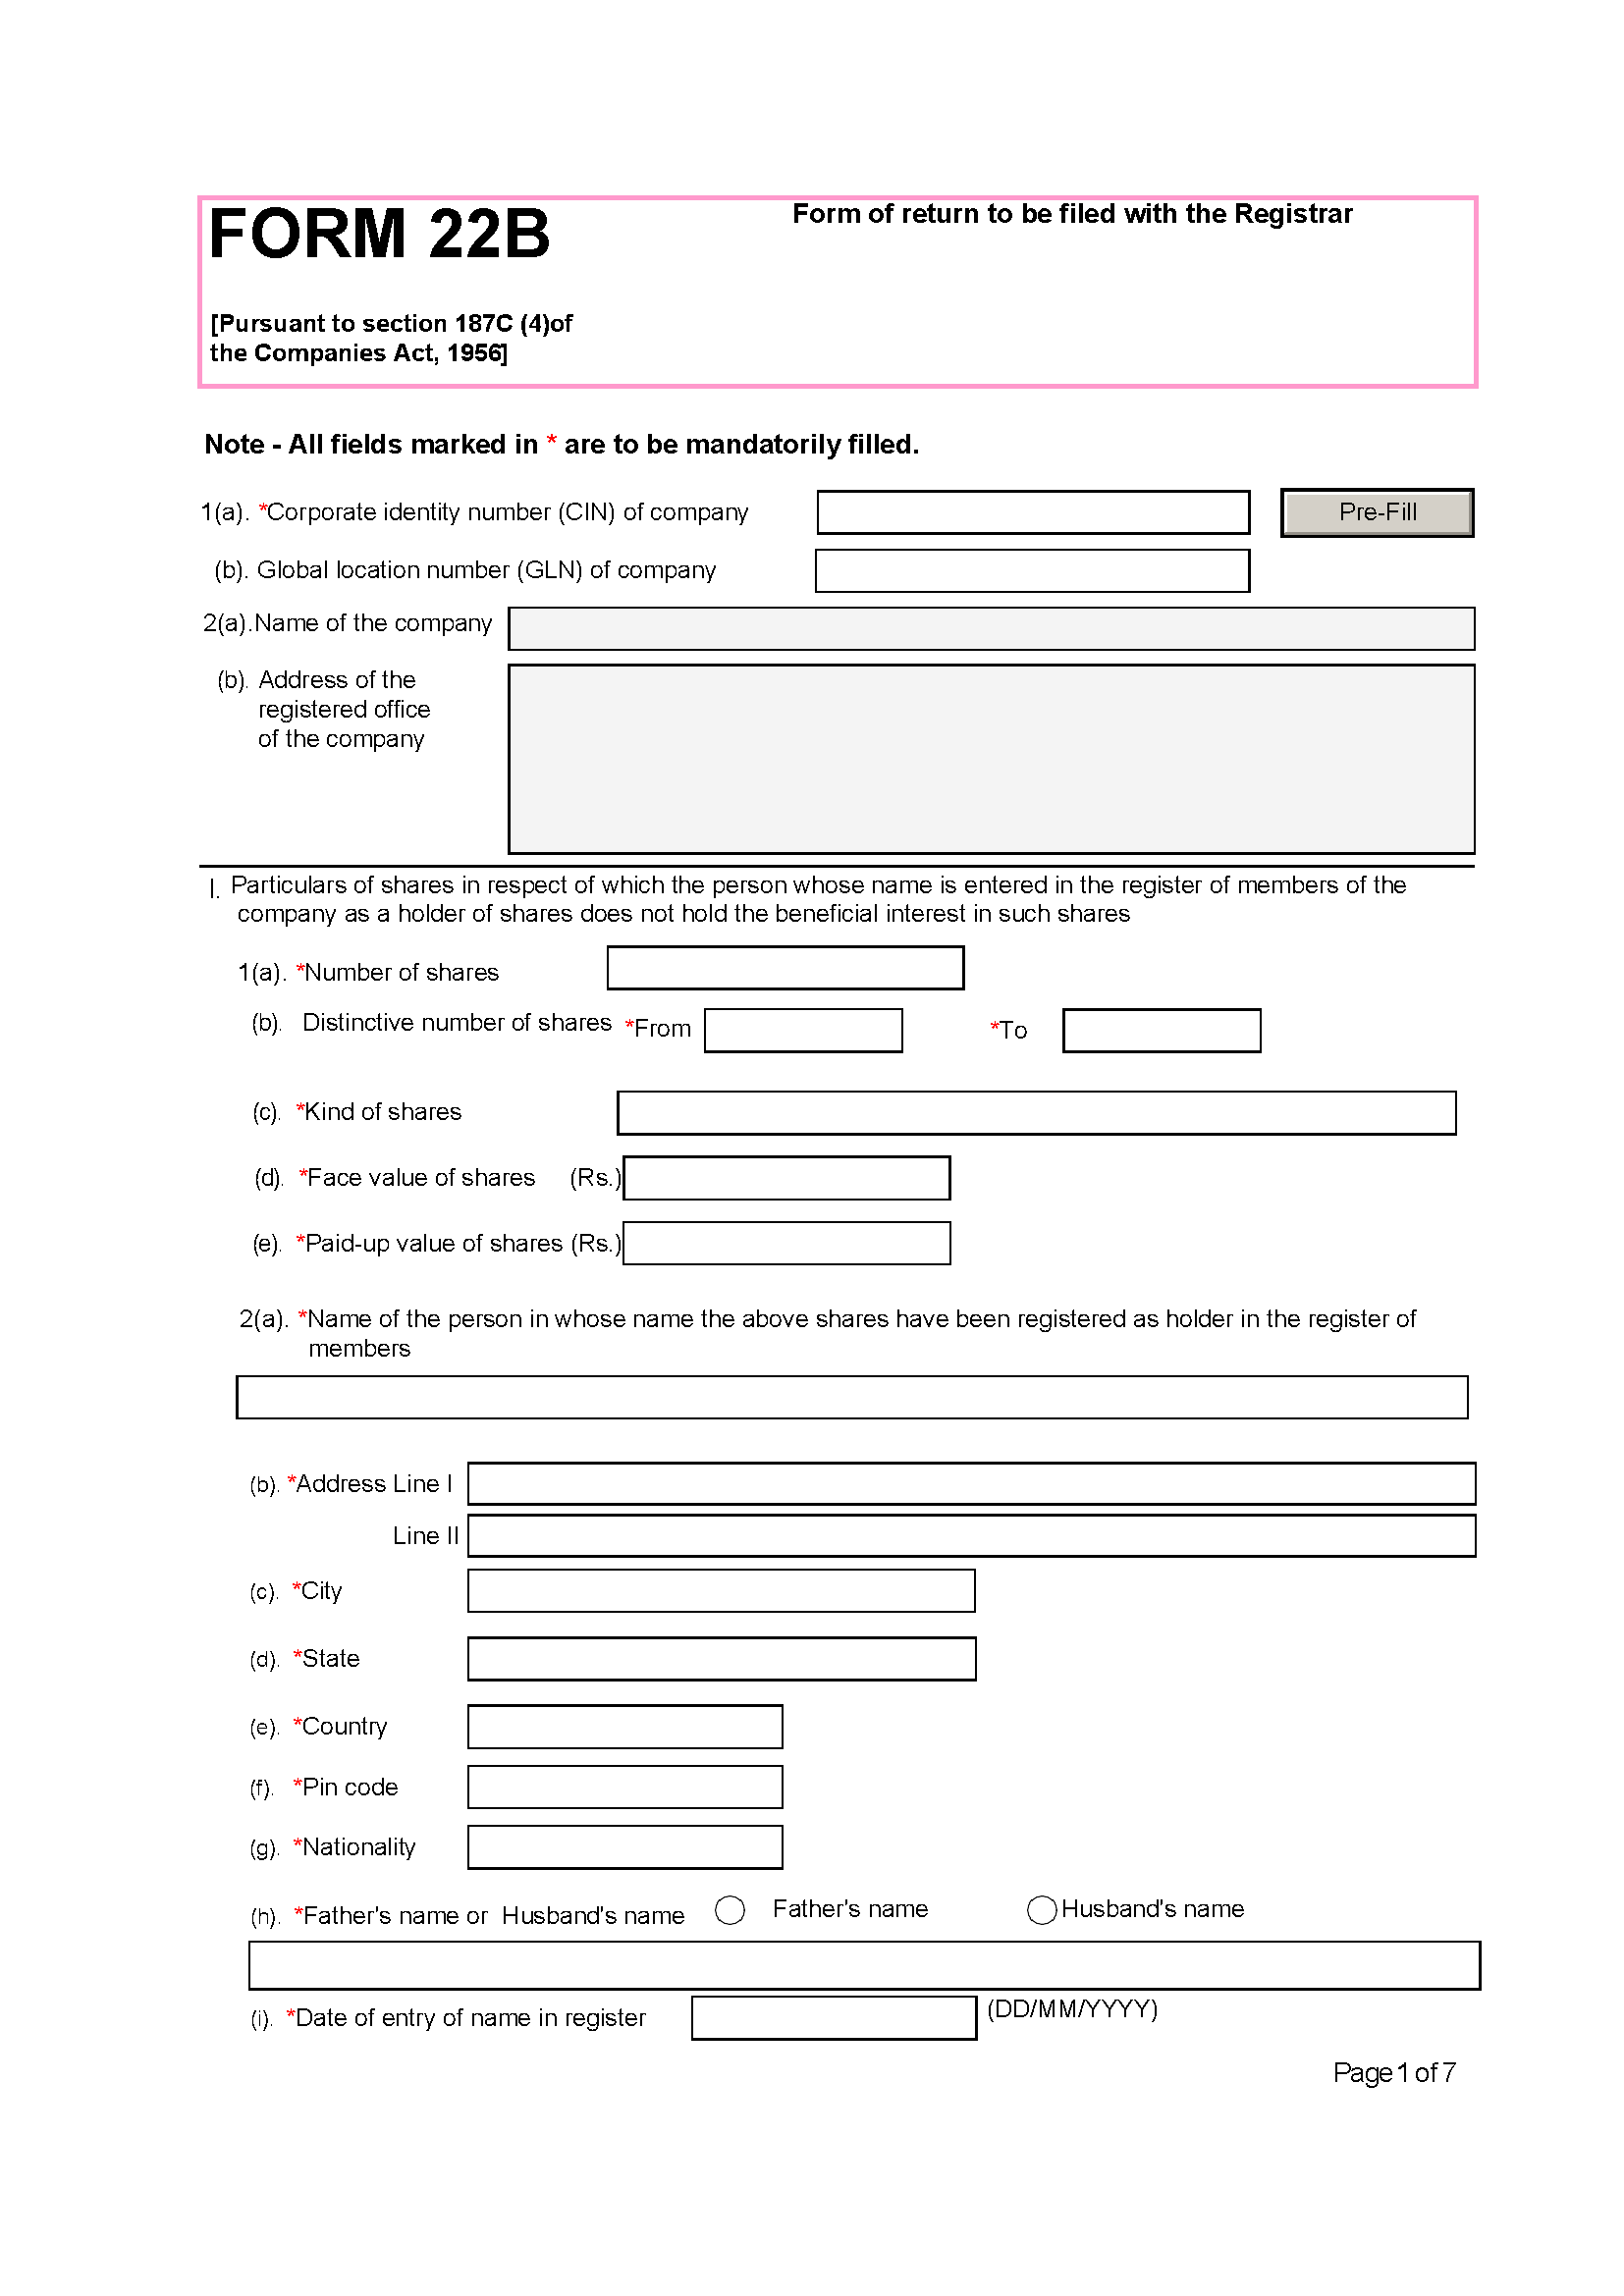 72 - Form of Return to be Filed with the Registrar-converted